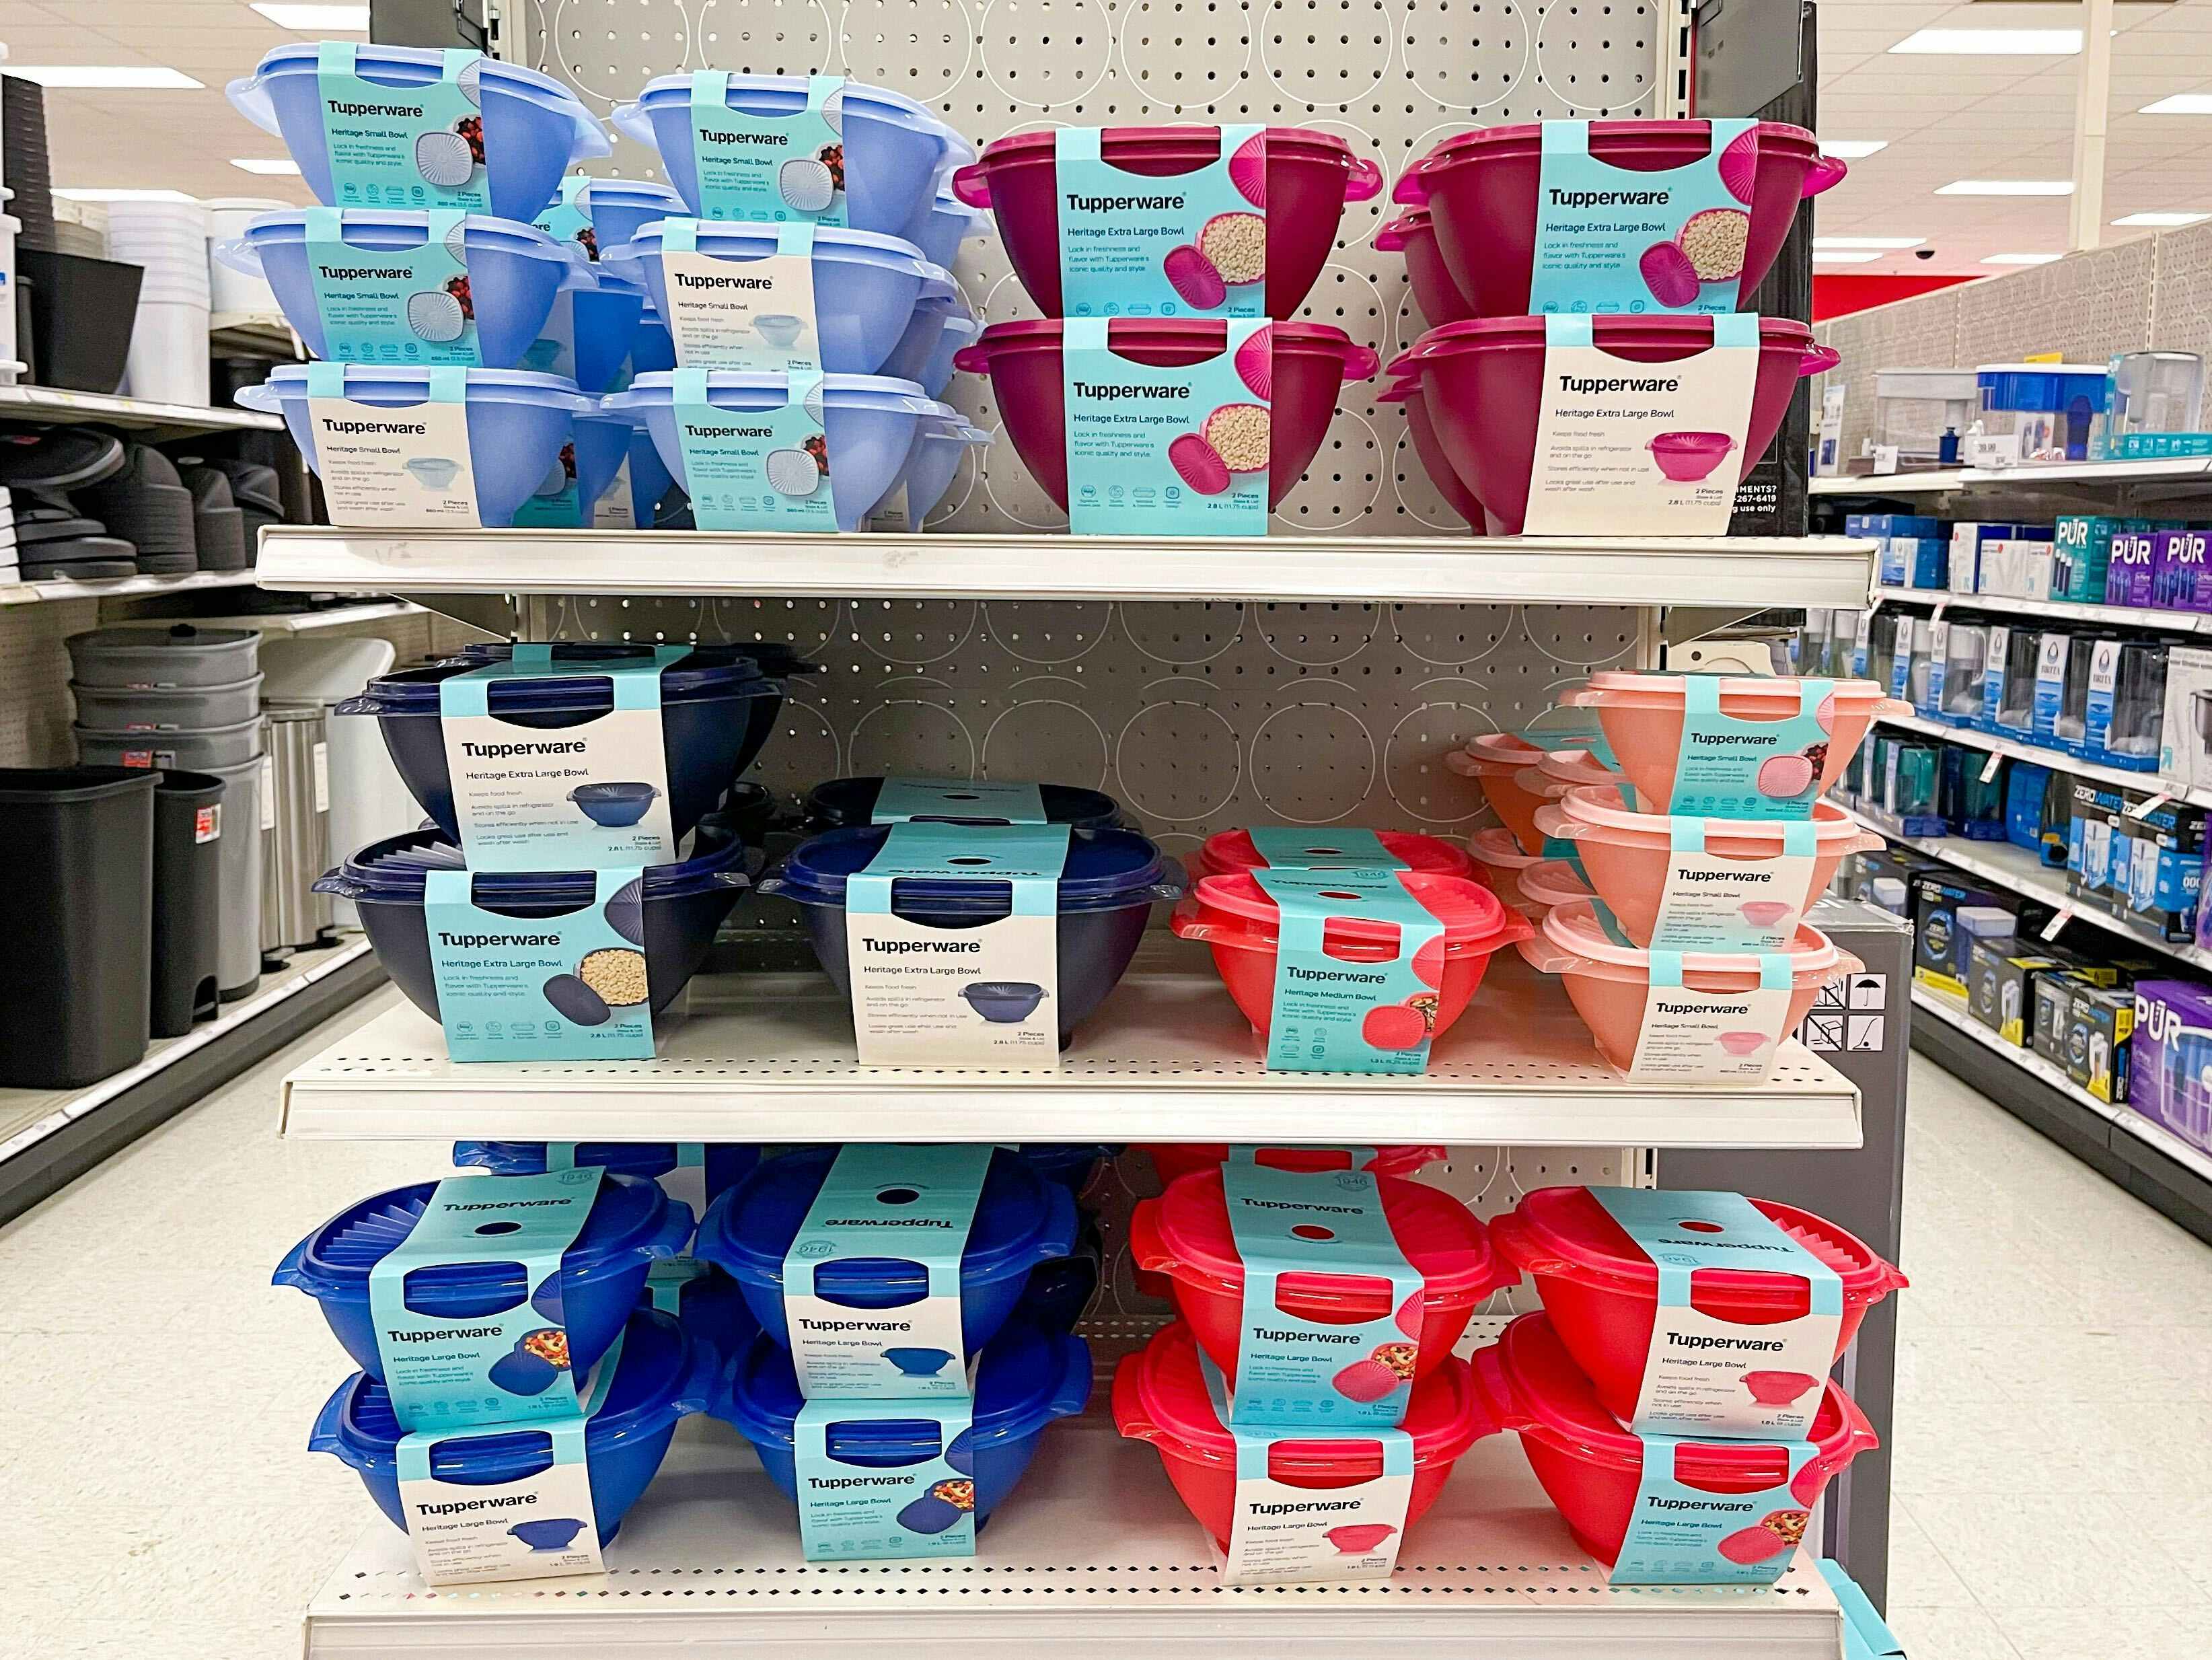 A variety of blue and red tupperware bowls on the endcap shelf at target